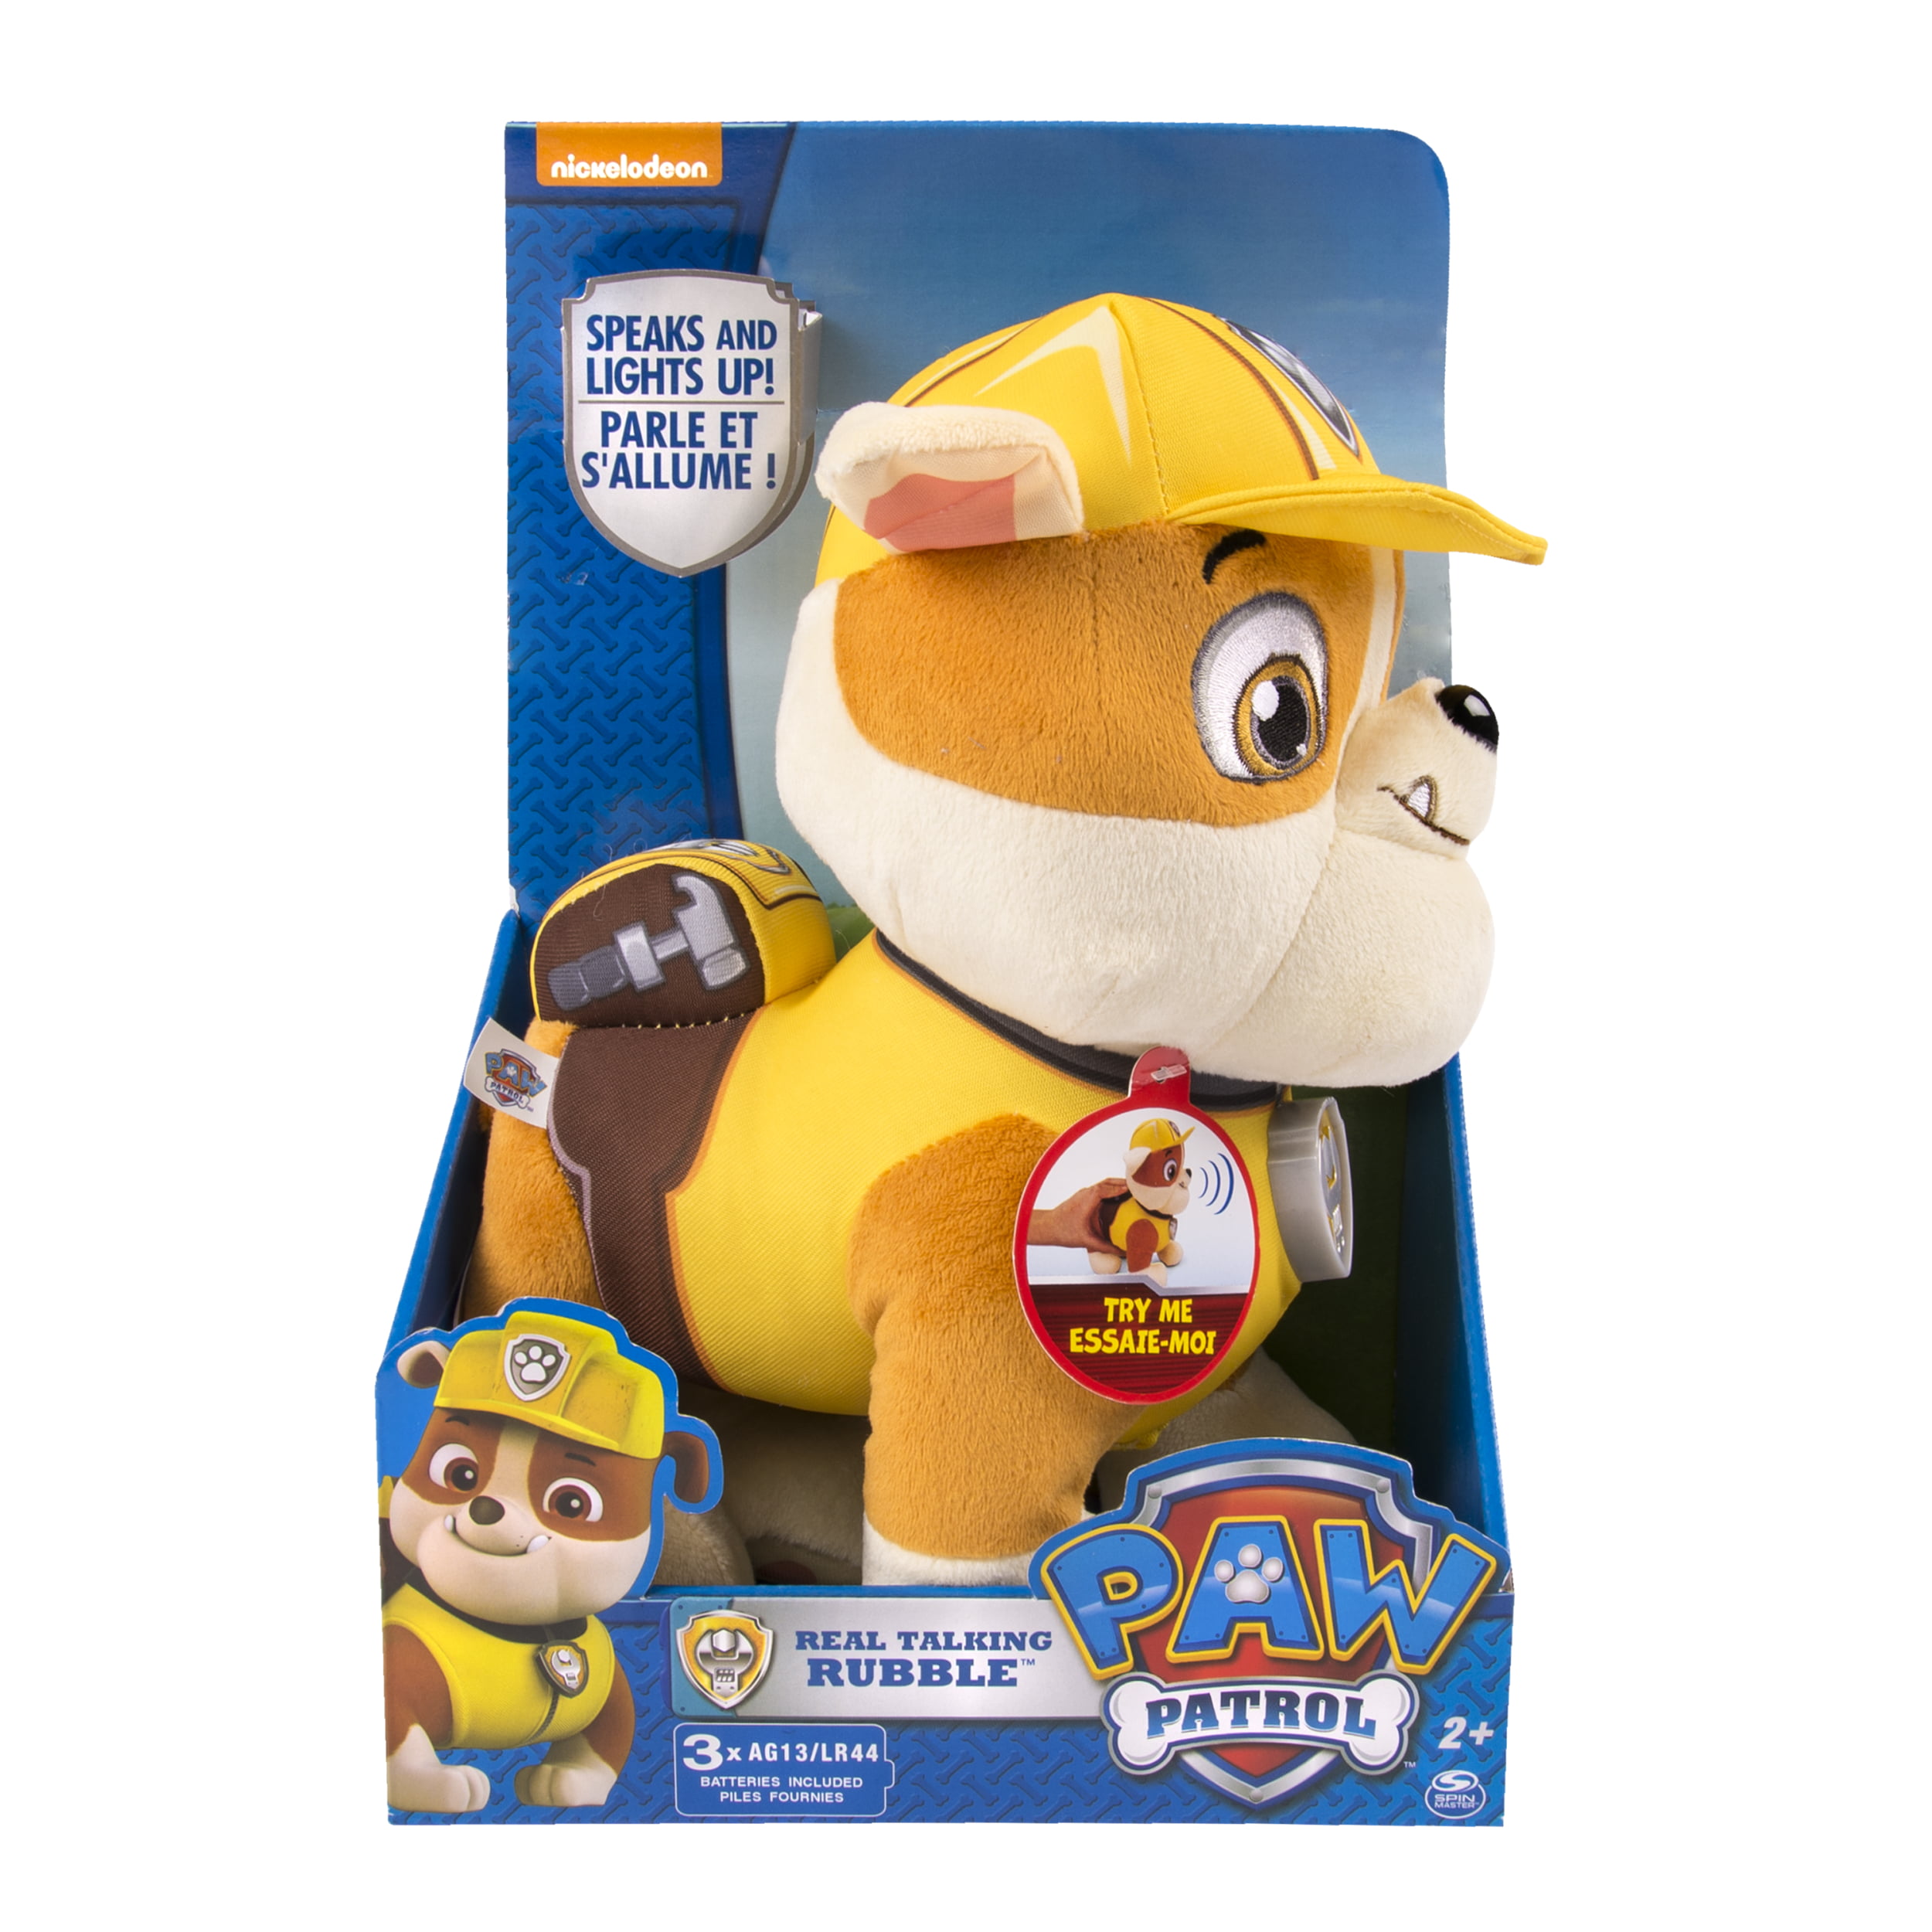 Paw Patrol Speaks And Lights Up Plush Real Talking Rubble Yellow Nickelodeon 